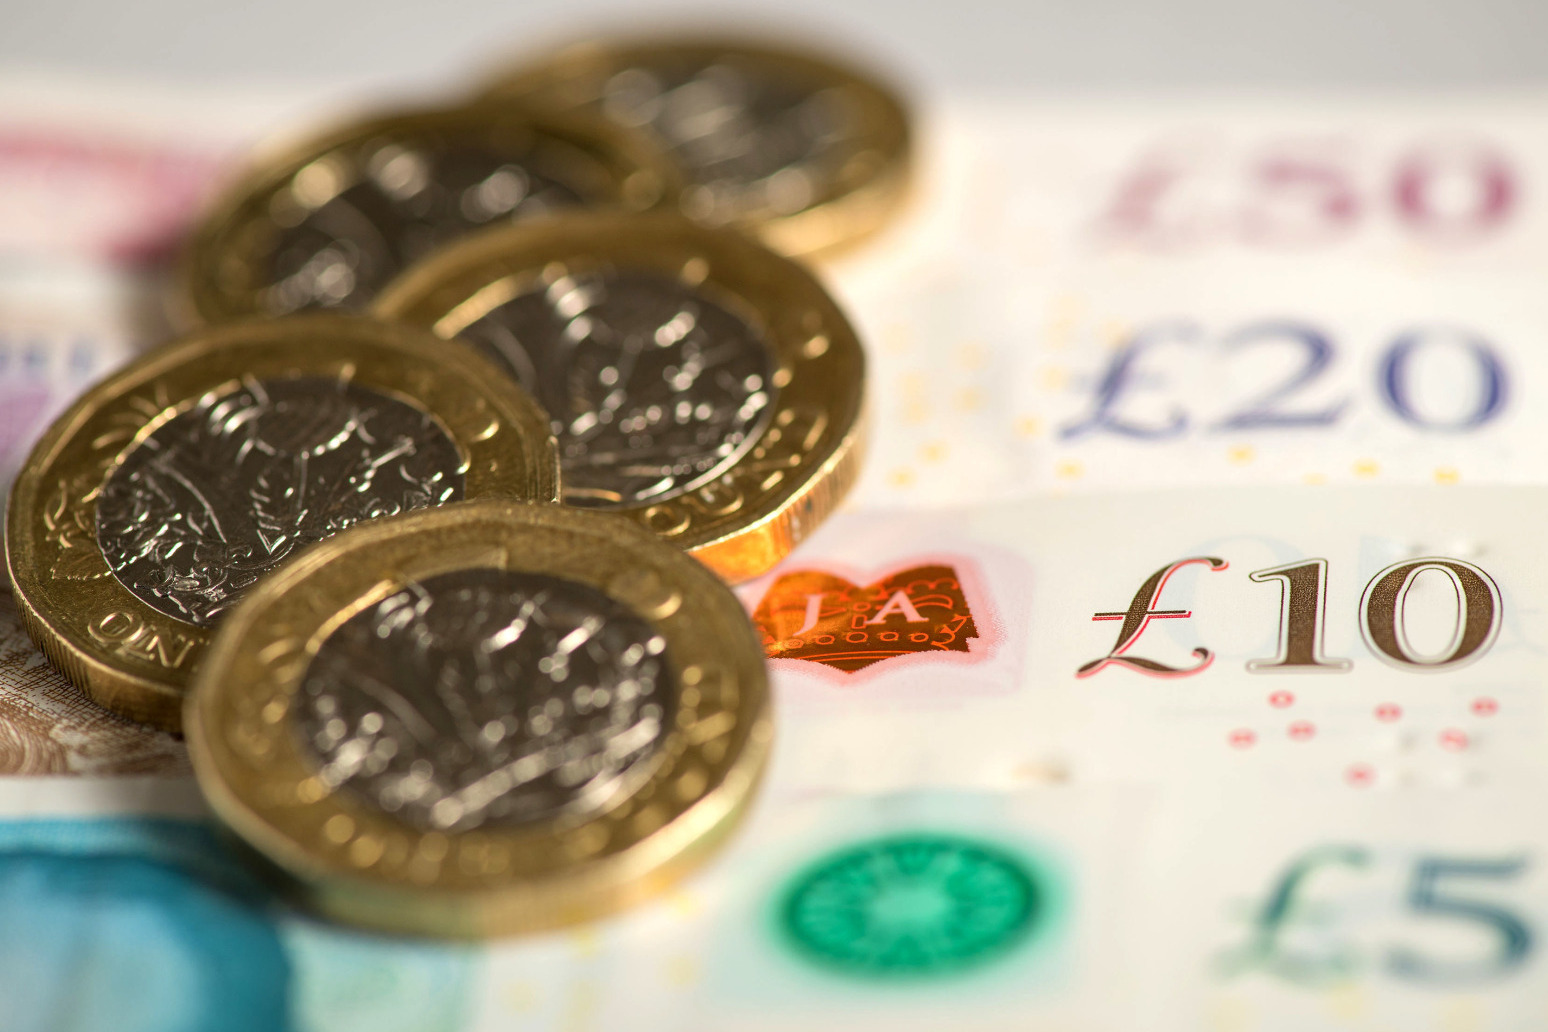 Fewer than half of firms cut executive pay in response to Covid-19 